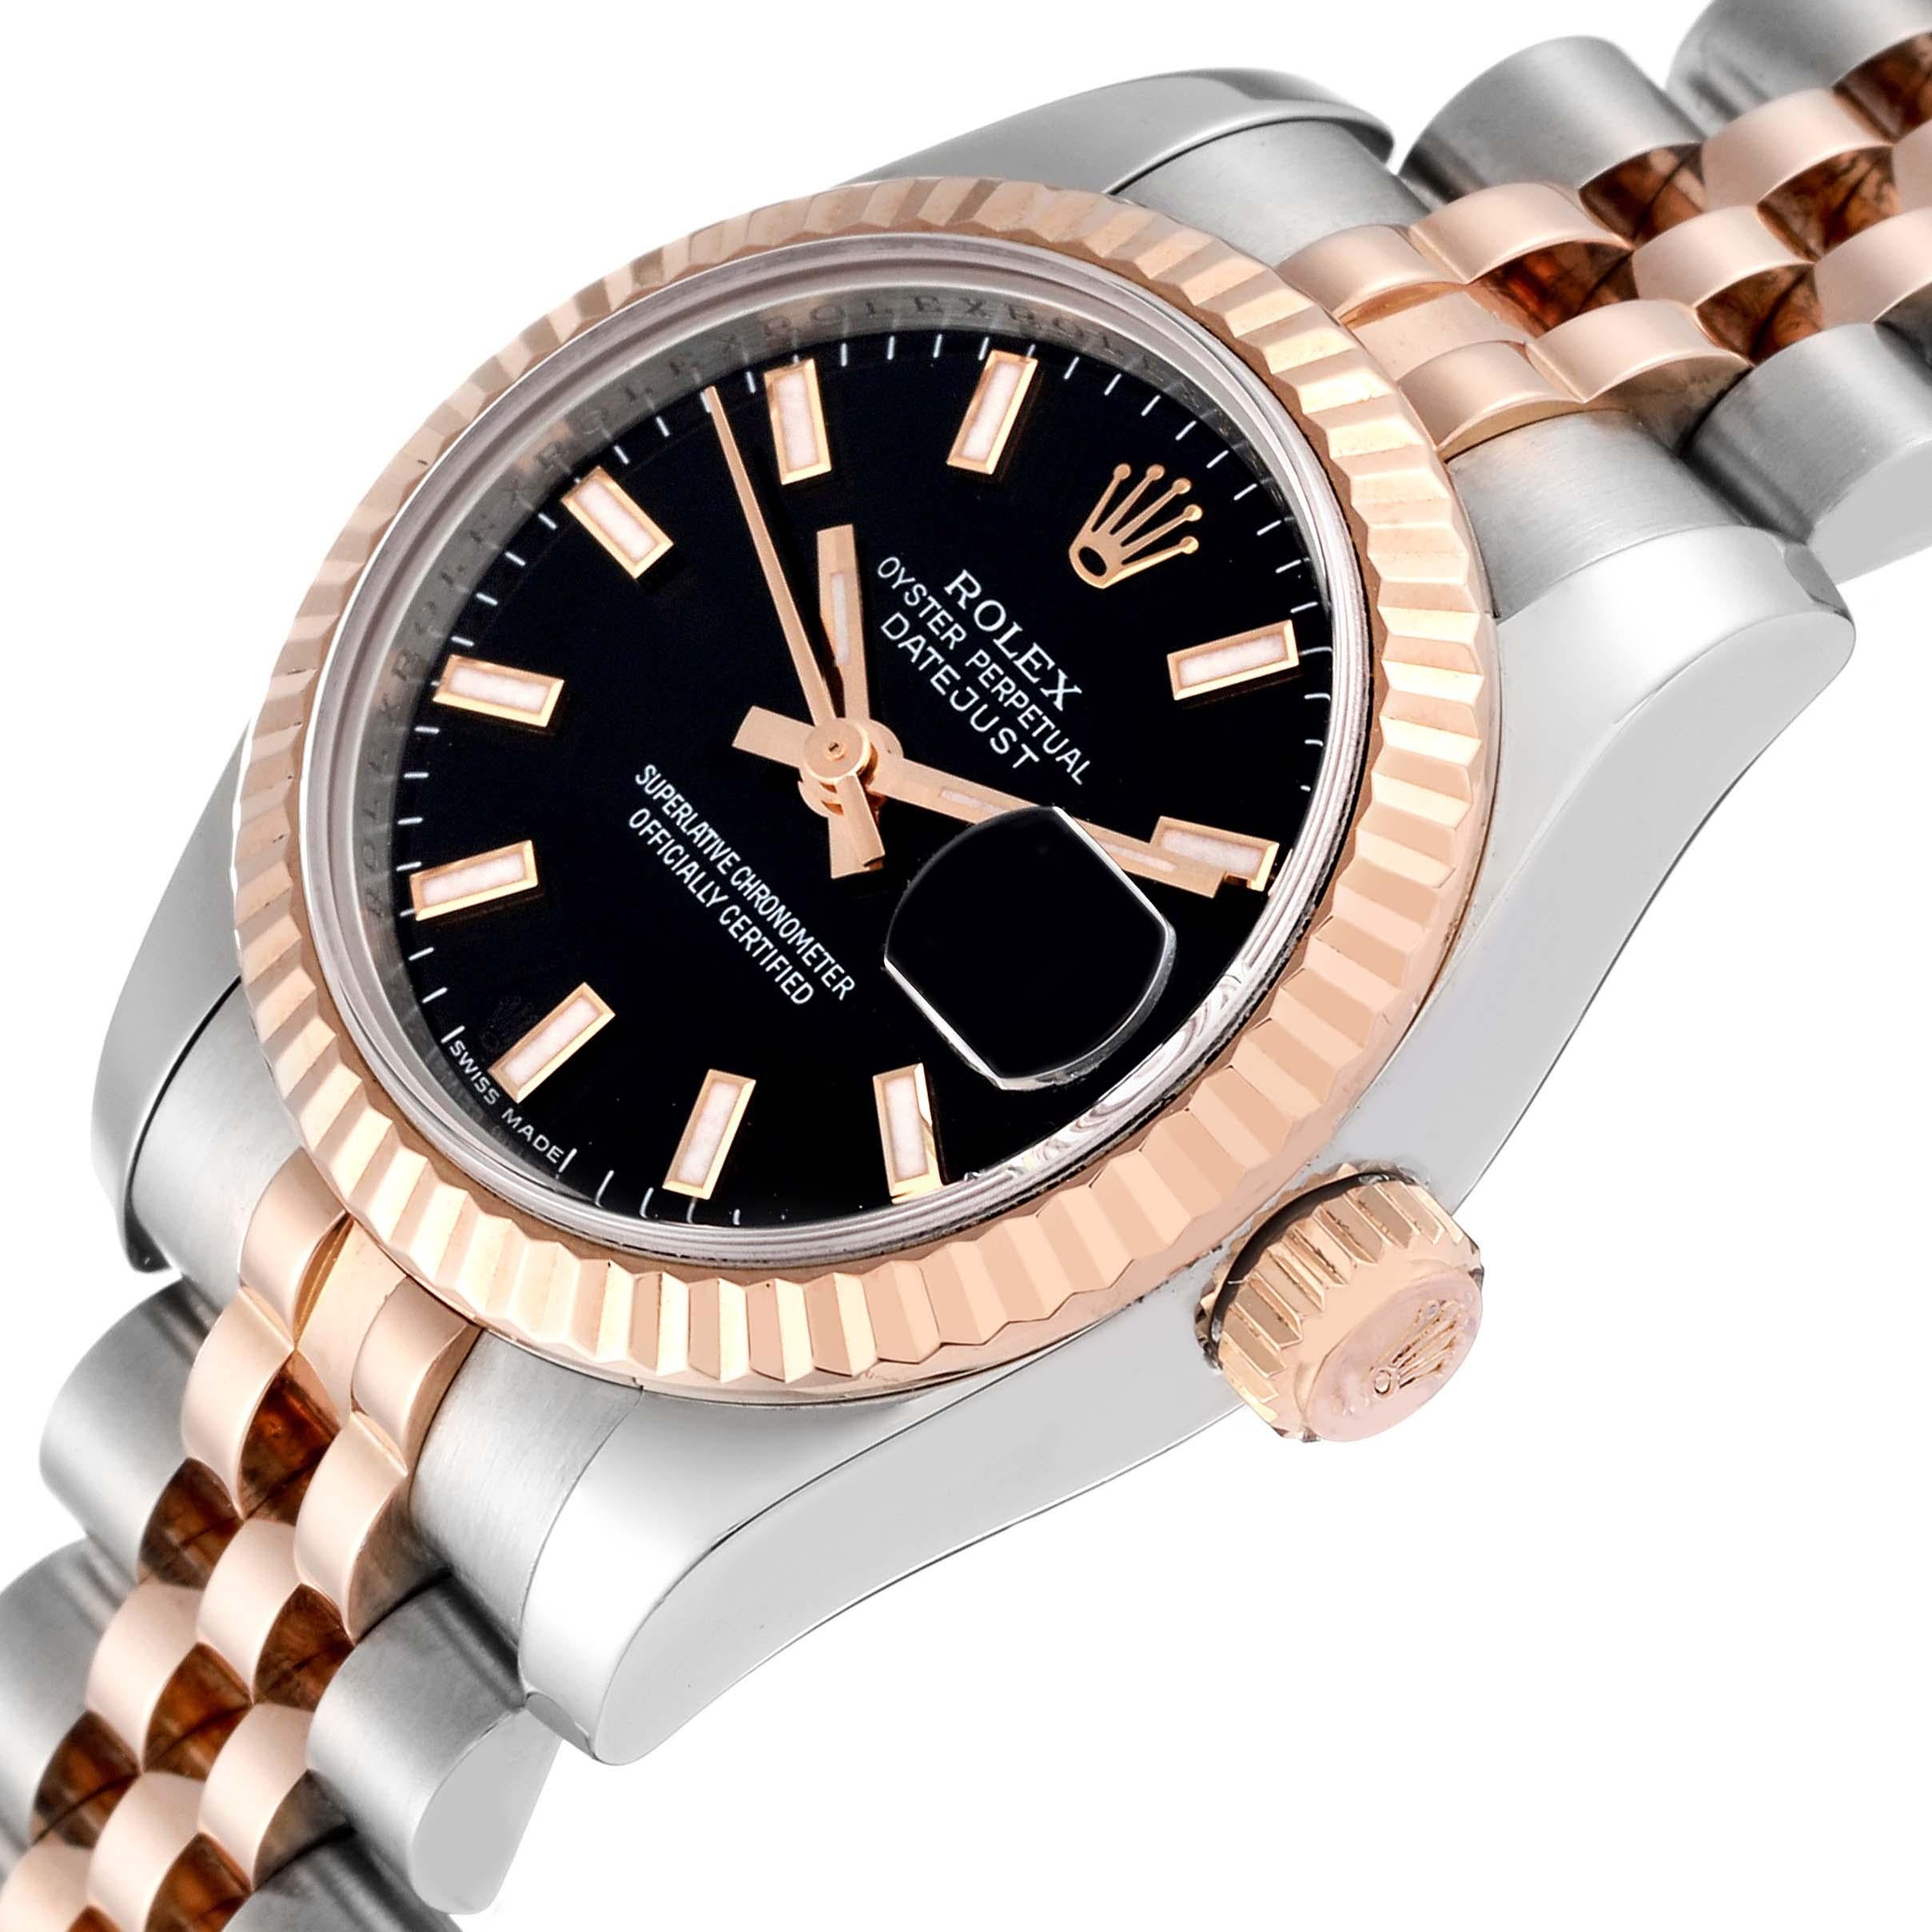 Rolex Datejust Steel Rose Gold Black Dial Ladies Watch 179171 Box Card For Sale 1